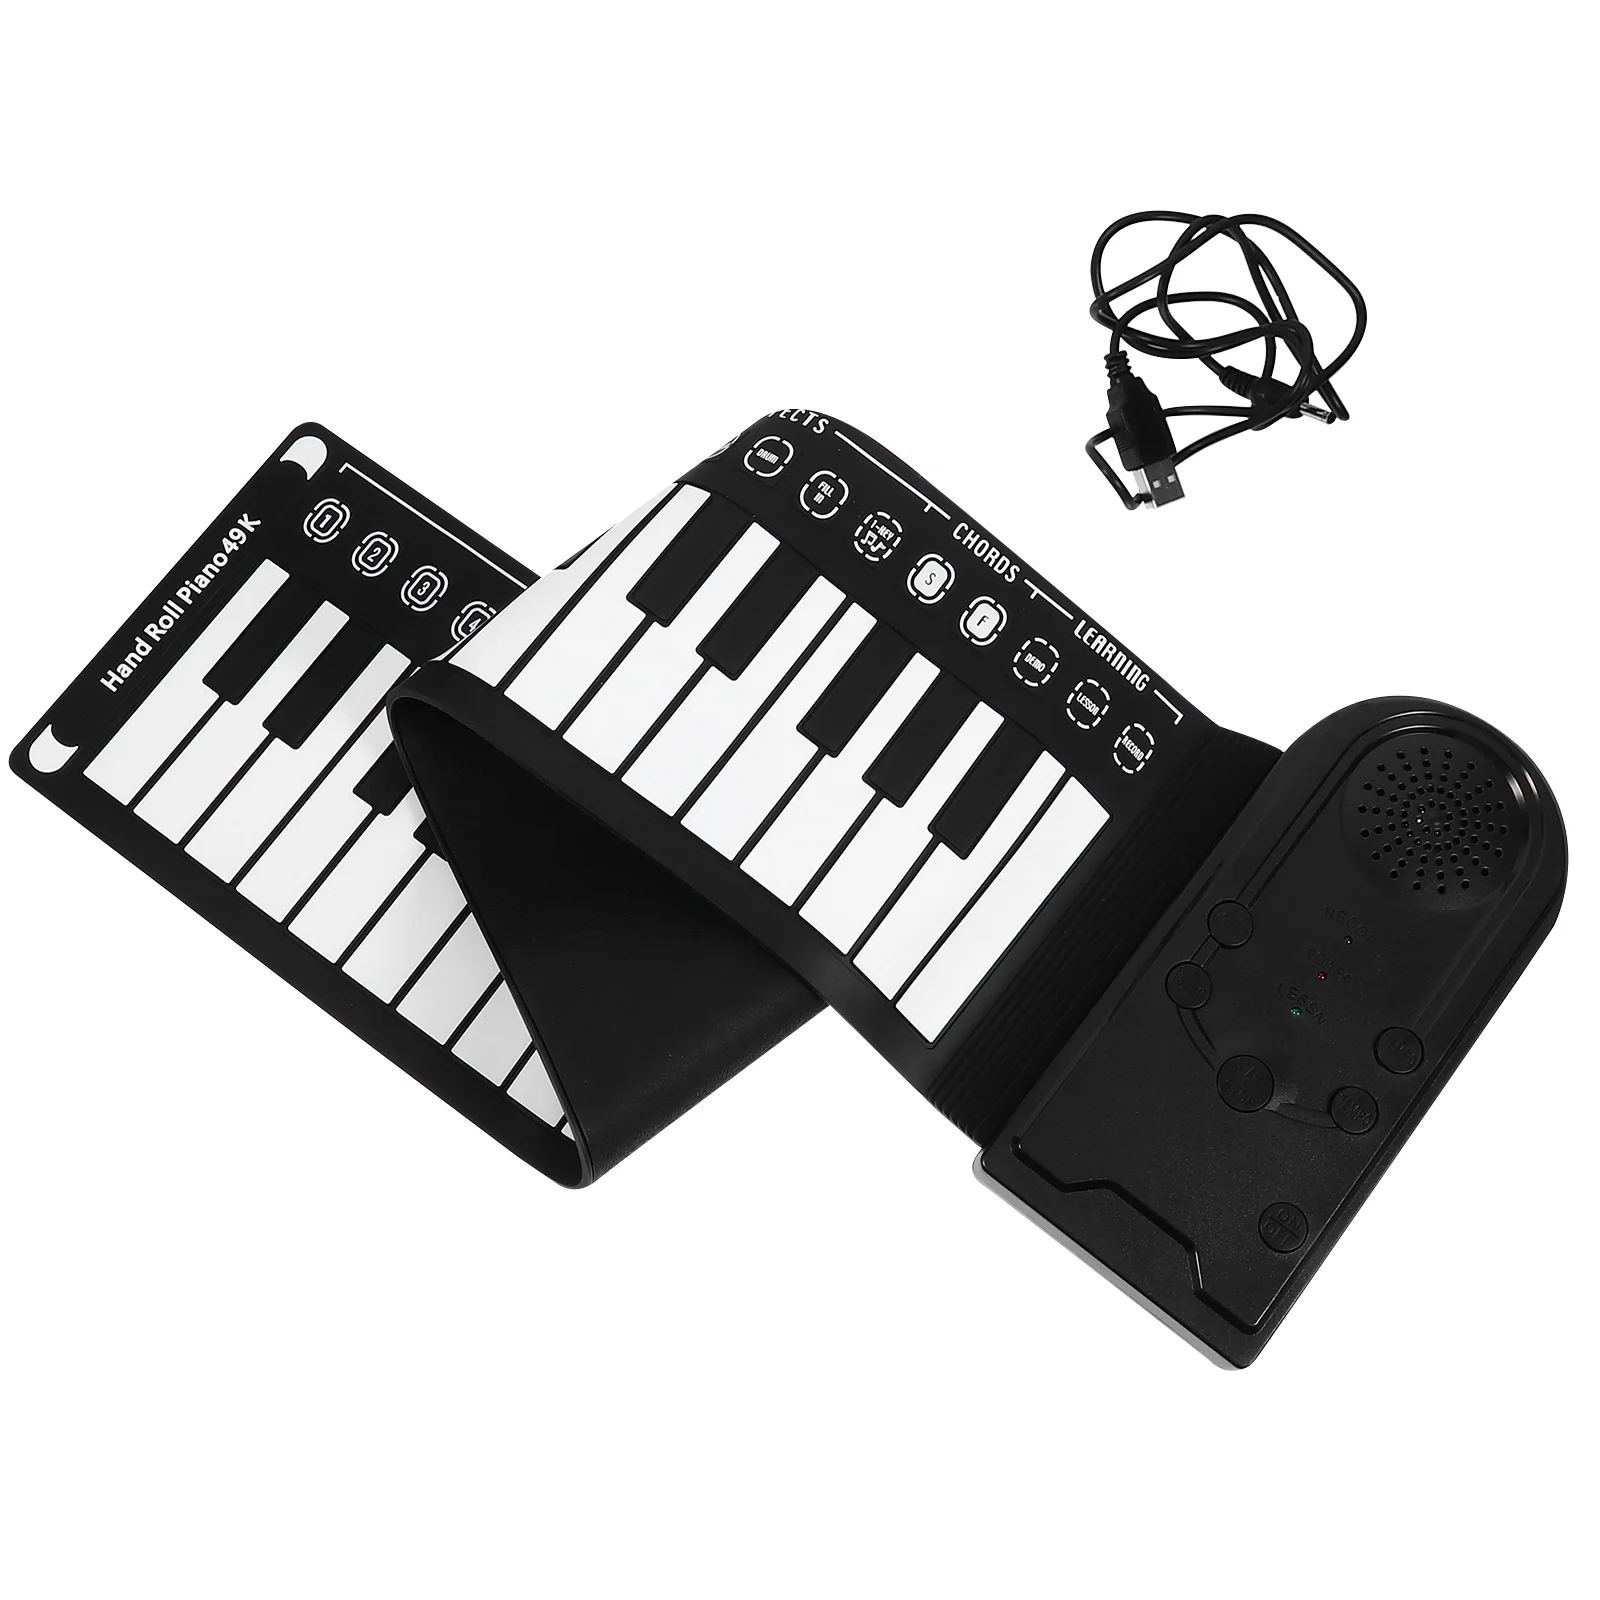 

49 Keys Roll Up Piano Volume Adjustable Electronic Piano for Children Kids Musical keyboard